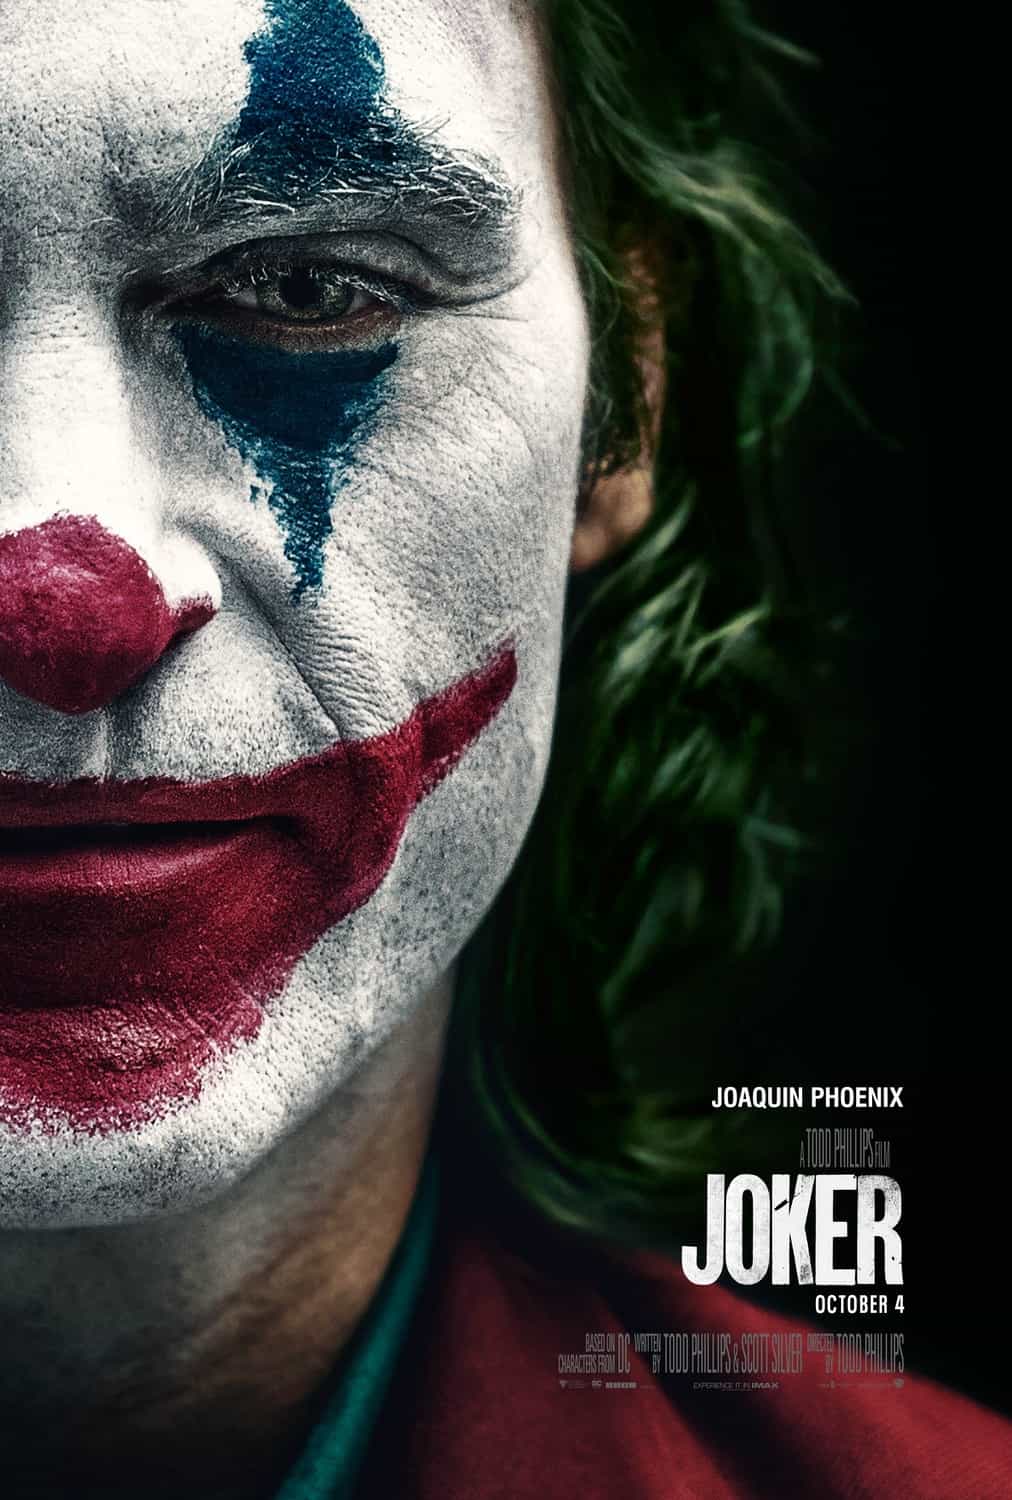 UK Box Office Analysis 11th - 13th October 2019:  Joker hold onto the top spot with nearly 10 million pound while Will Smith disappoints with new entry at 3